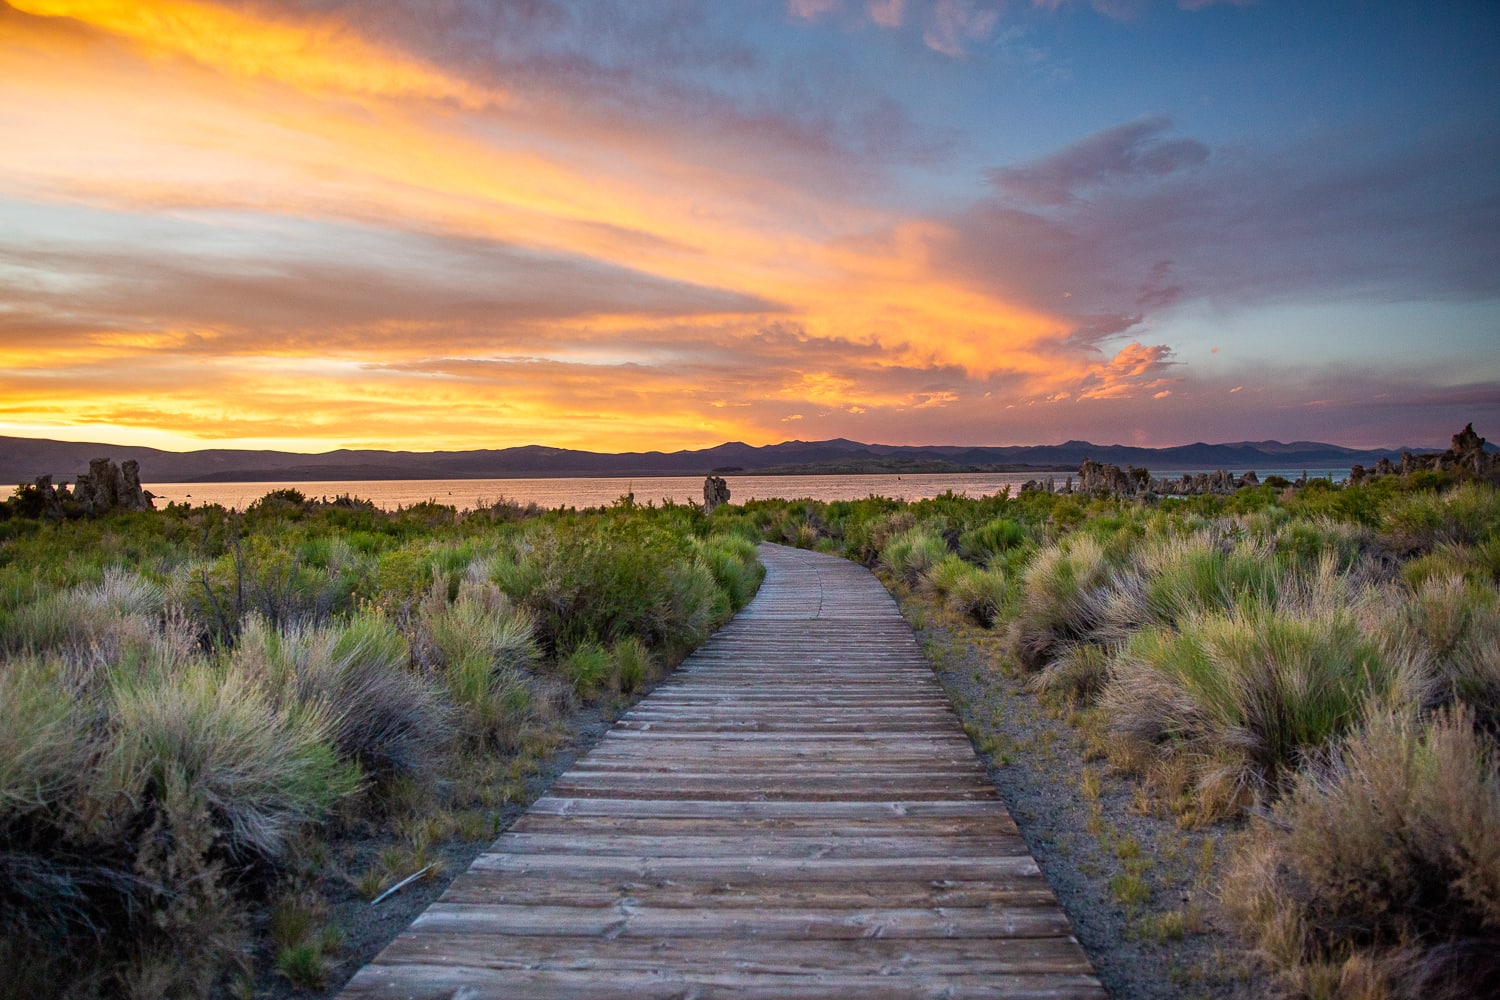 The wooden boardwalk leads to the shore of Mono Lake at sunset.